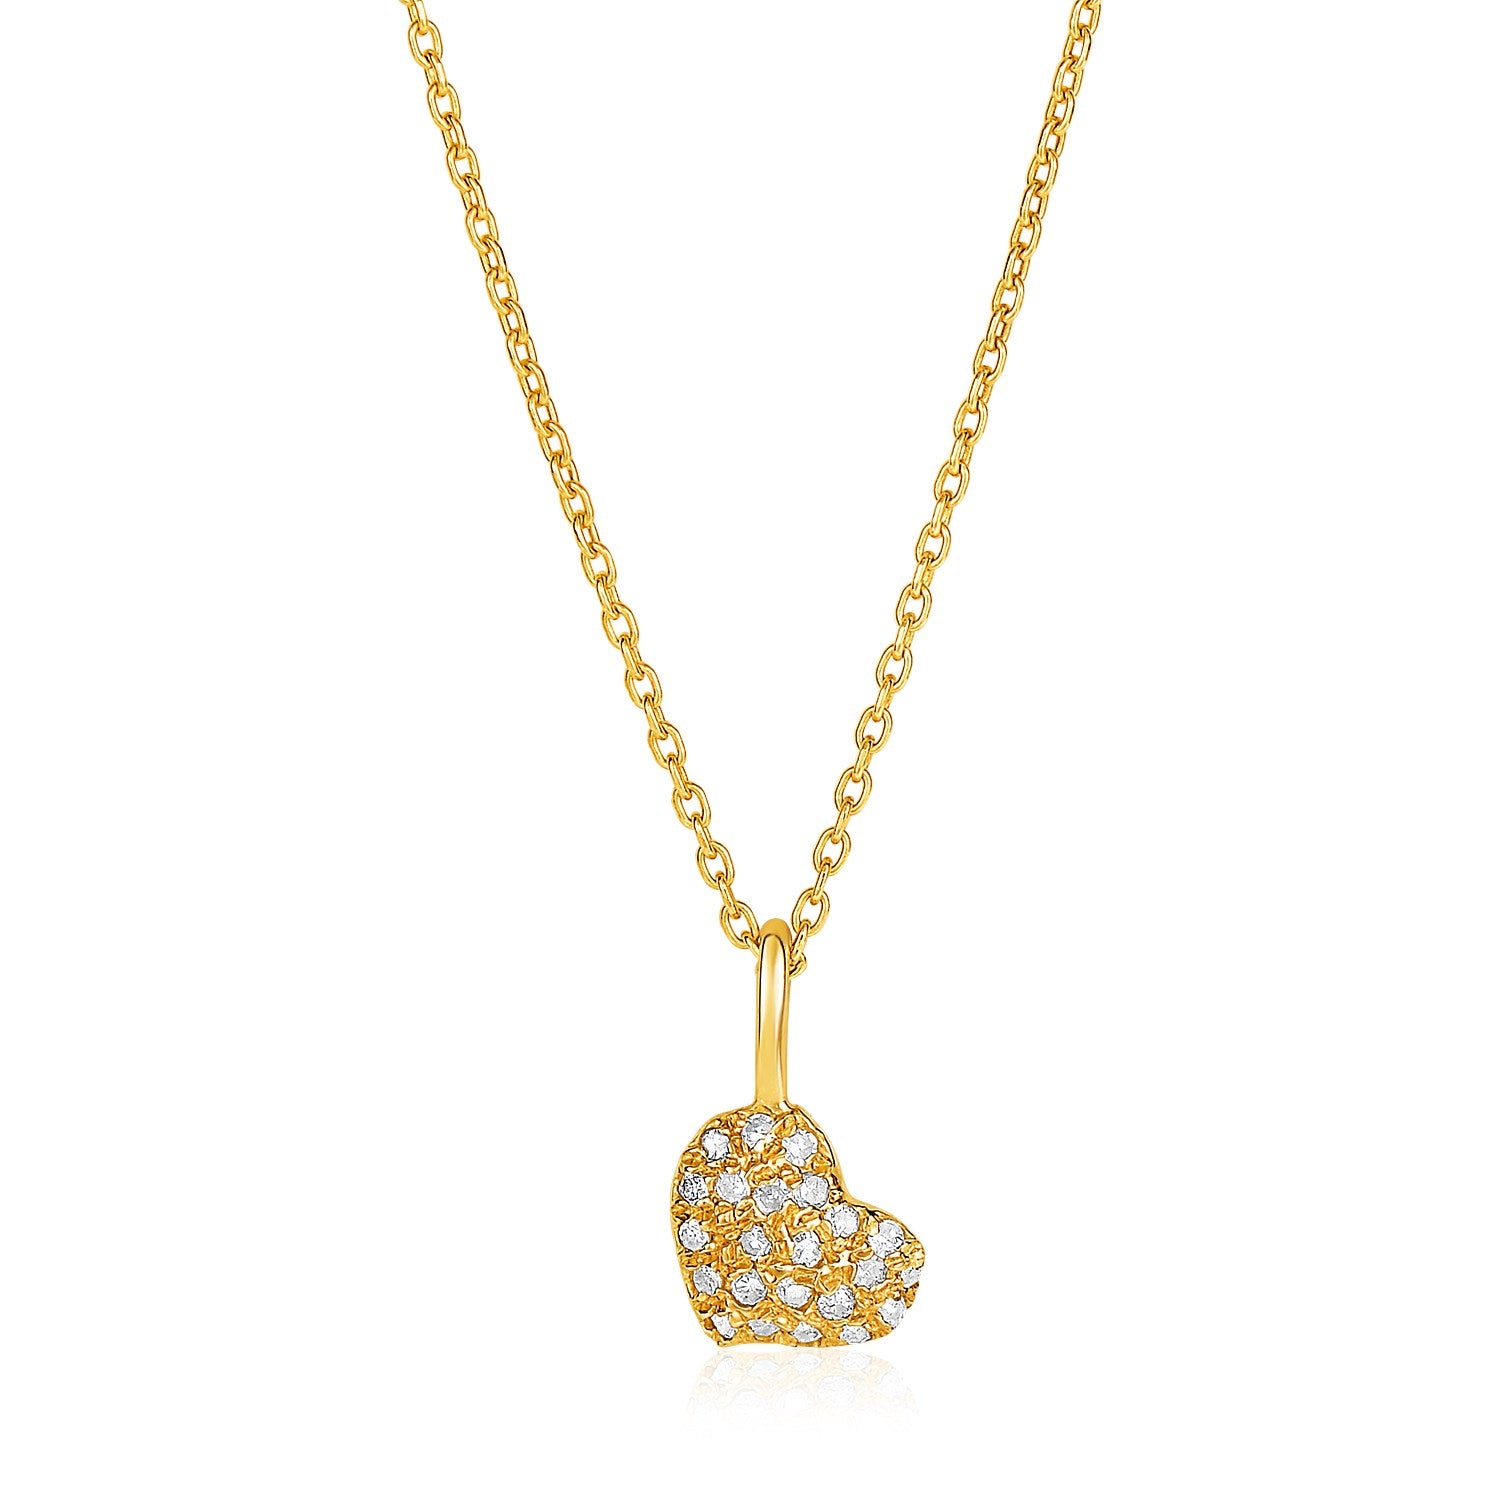 14k Yellow Gold Necklace with Gold and Diamond Heart Pendant (1/10 cttw)